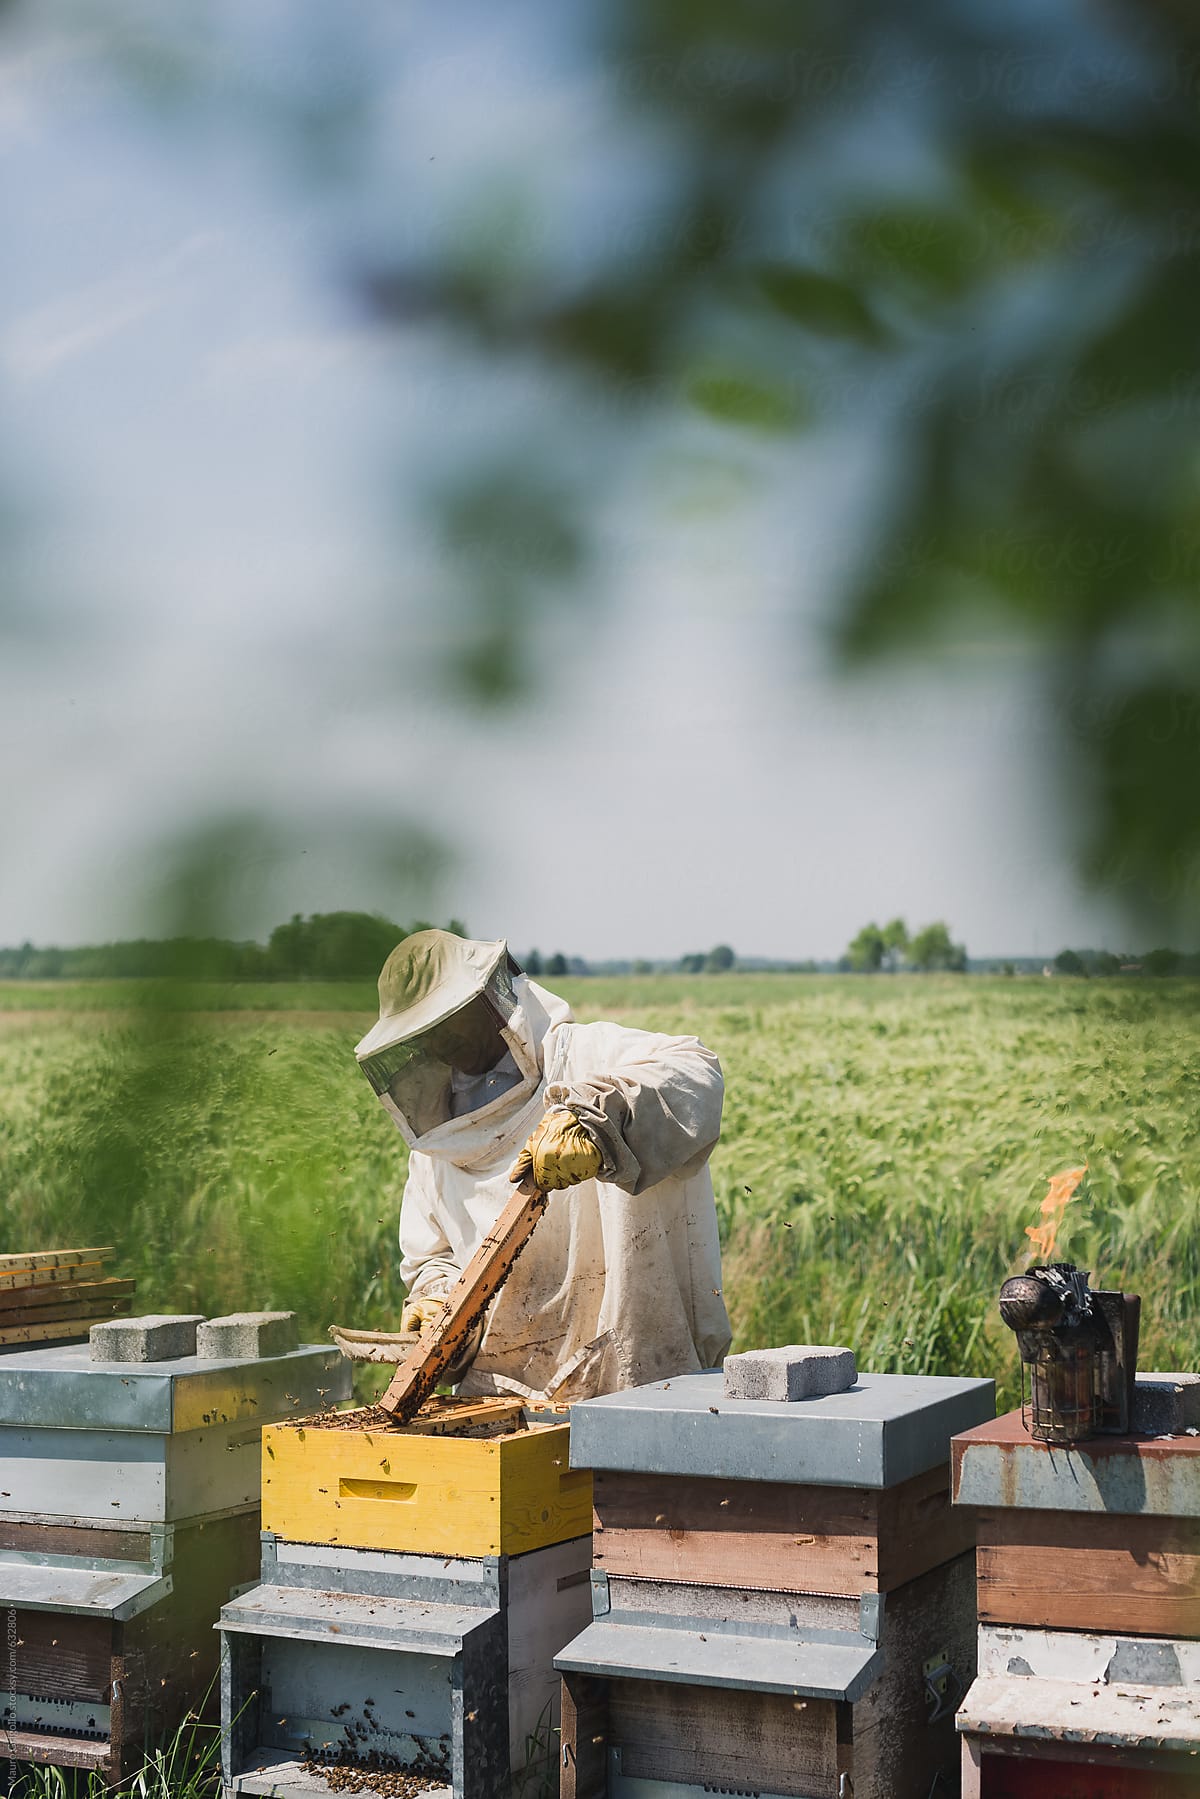 Beekeeper works with bees and beehives on the apiary